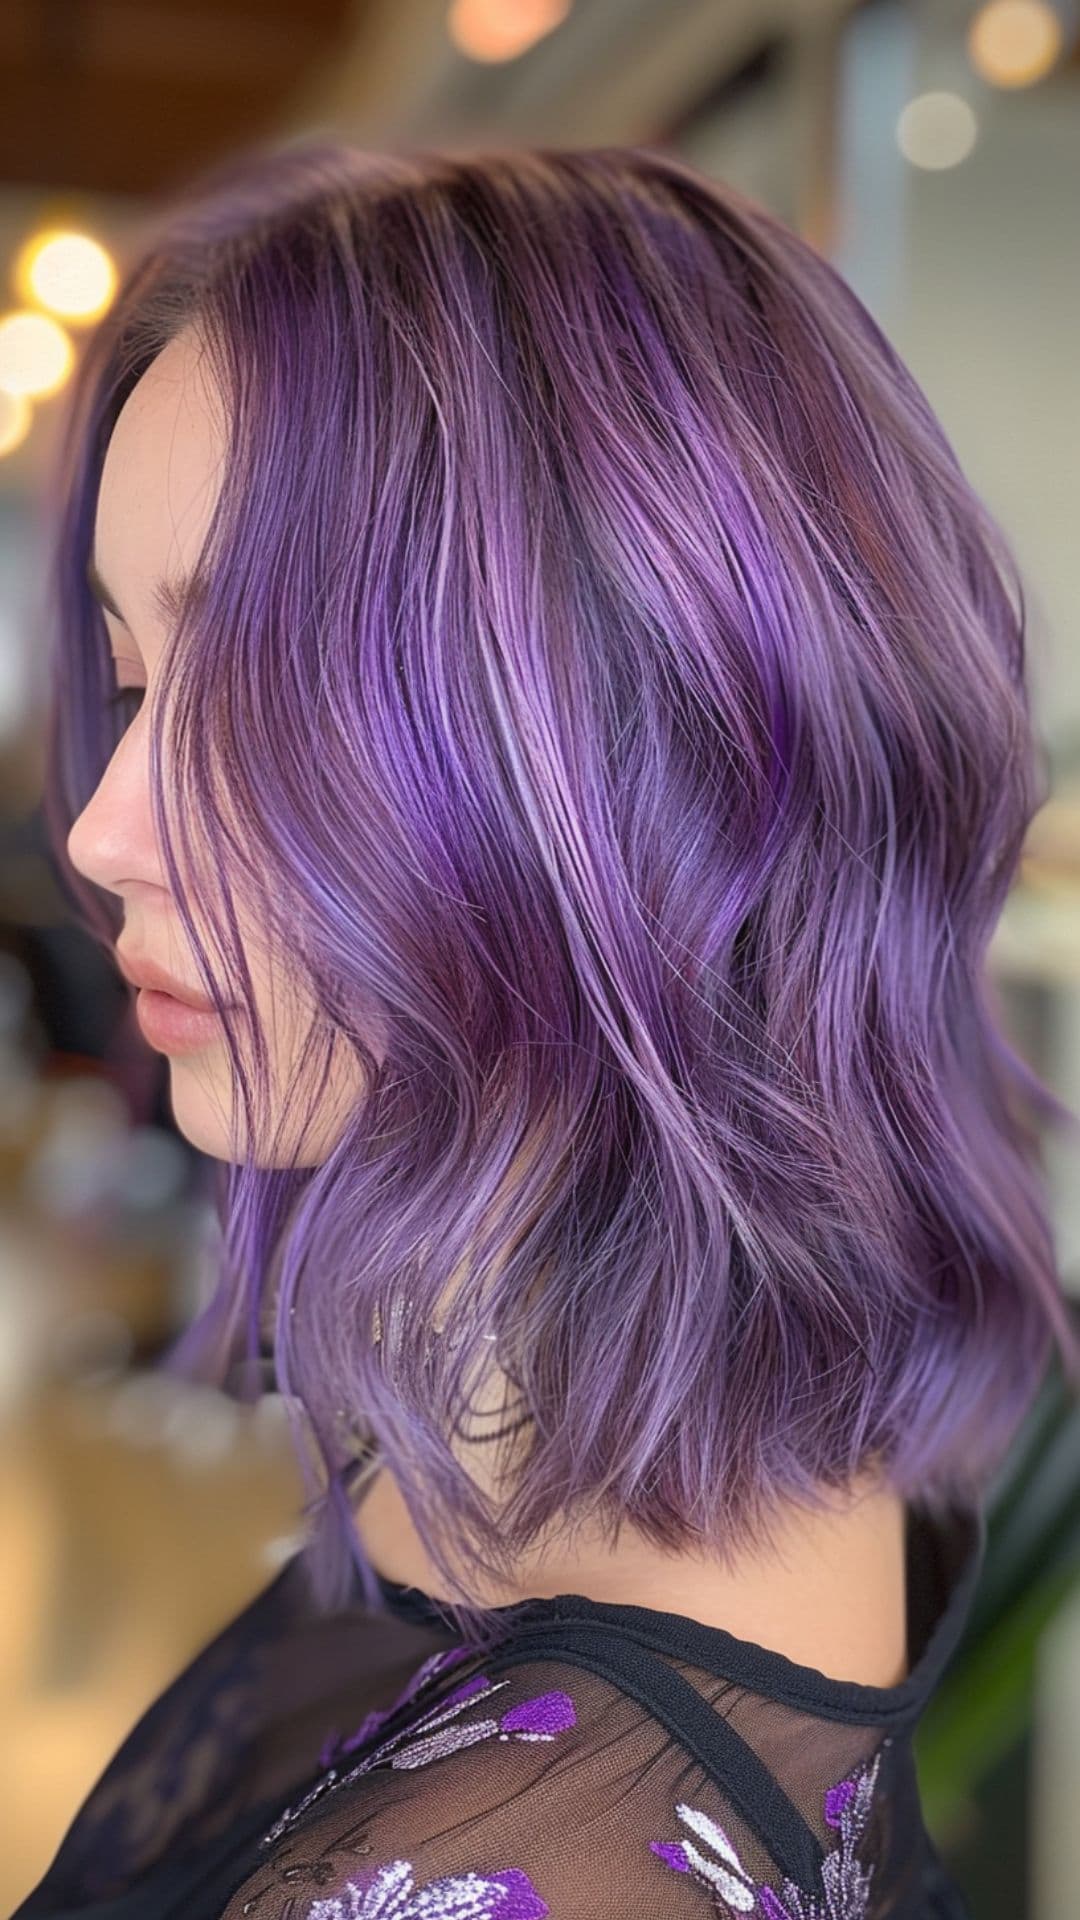 A young woman modelling a frosted lavender hair.